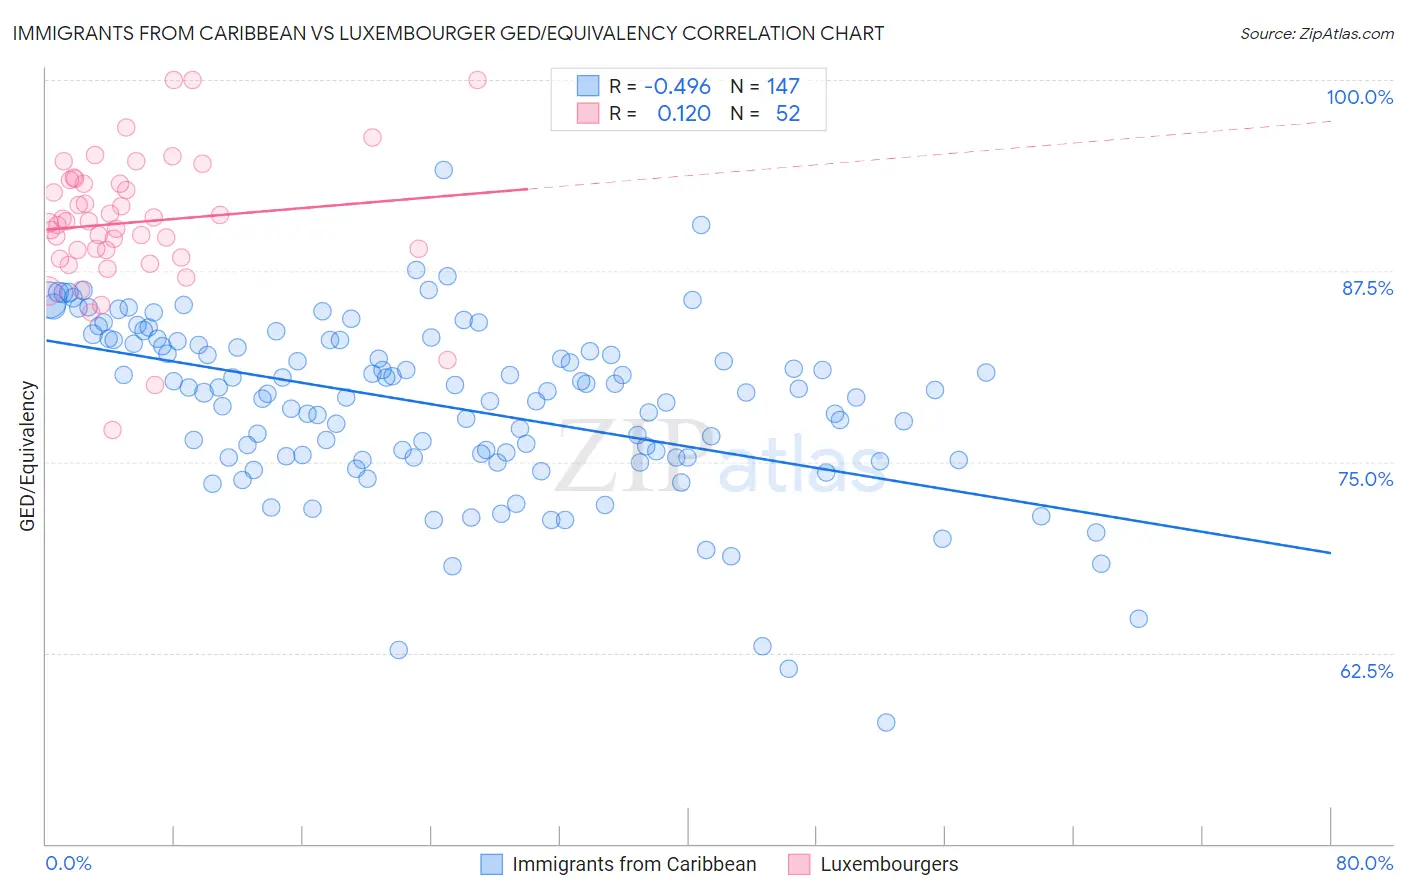 Immigrants from Caribbean vs Luxembourger GED/Equivalency